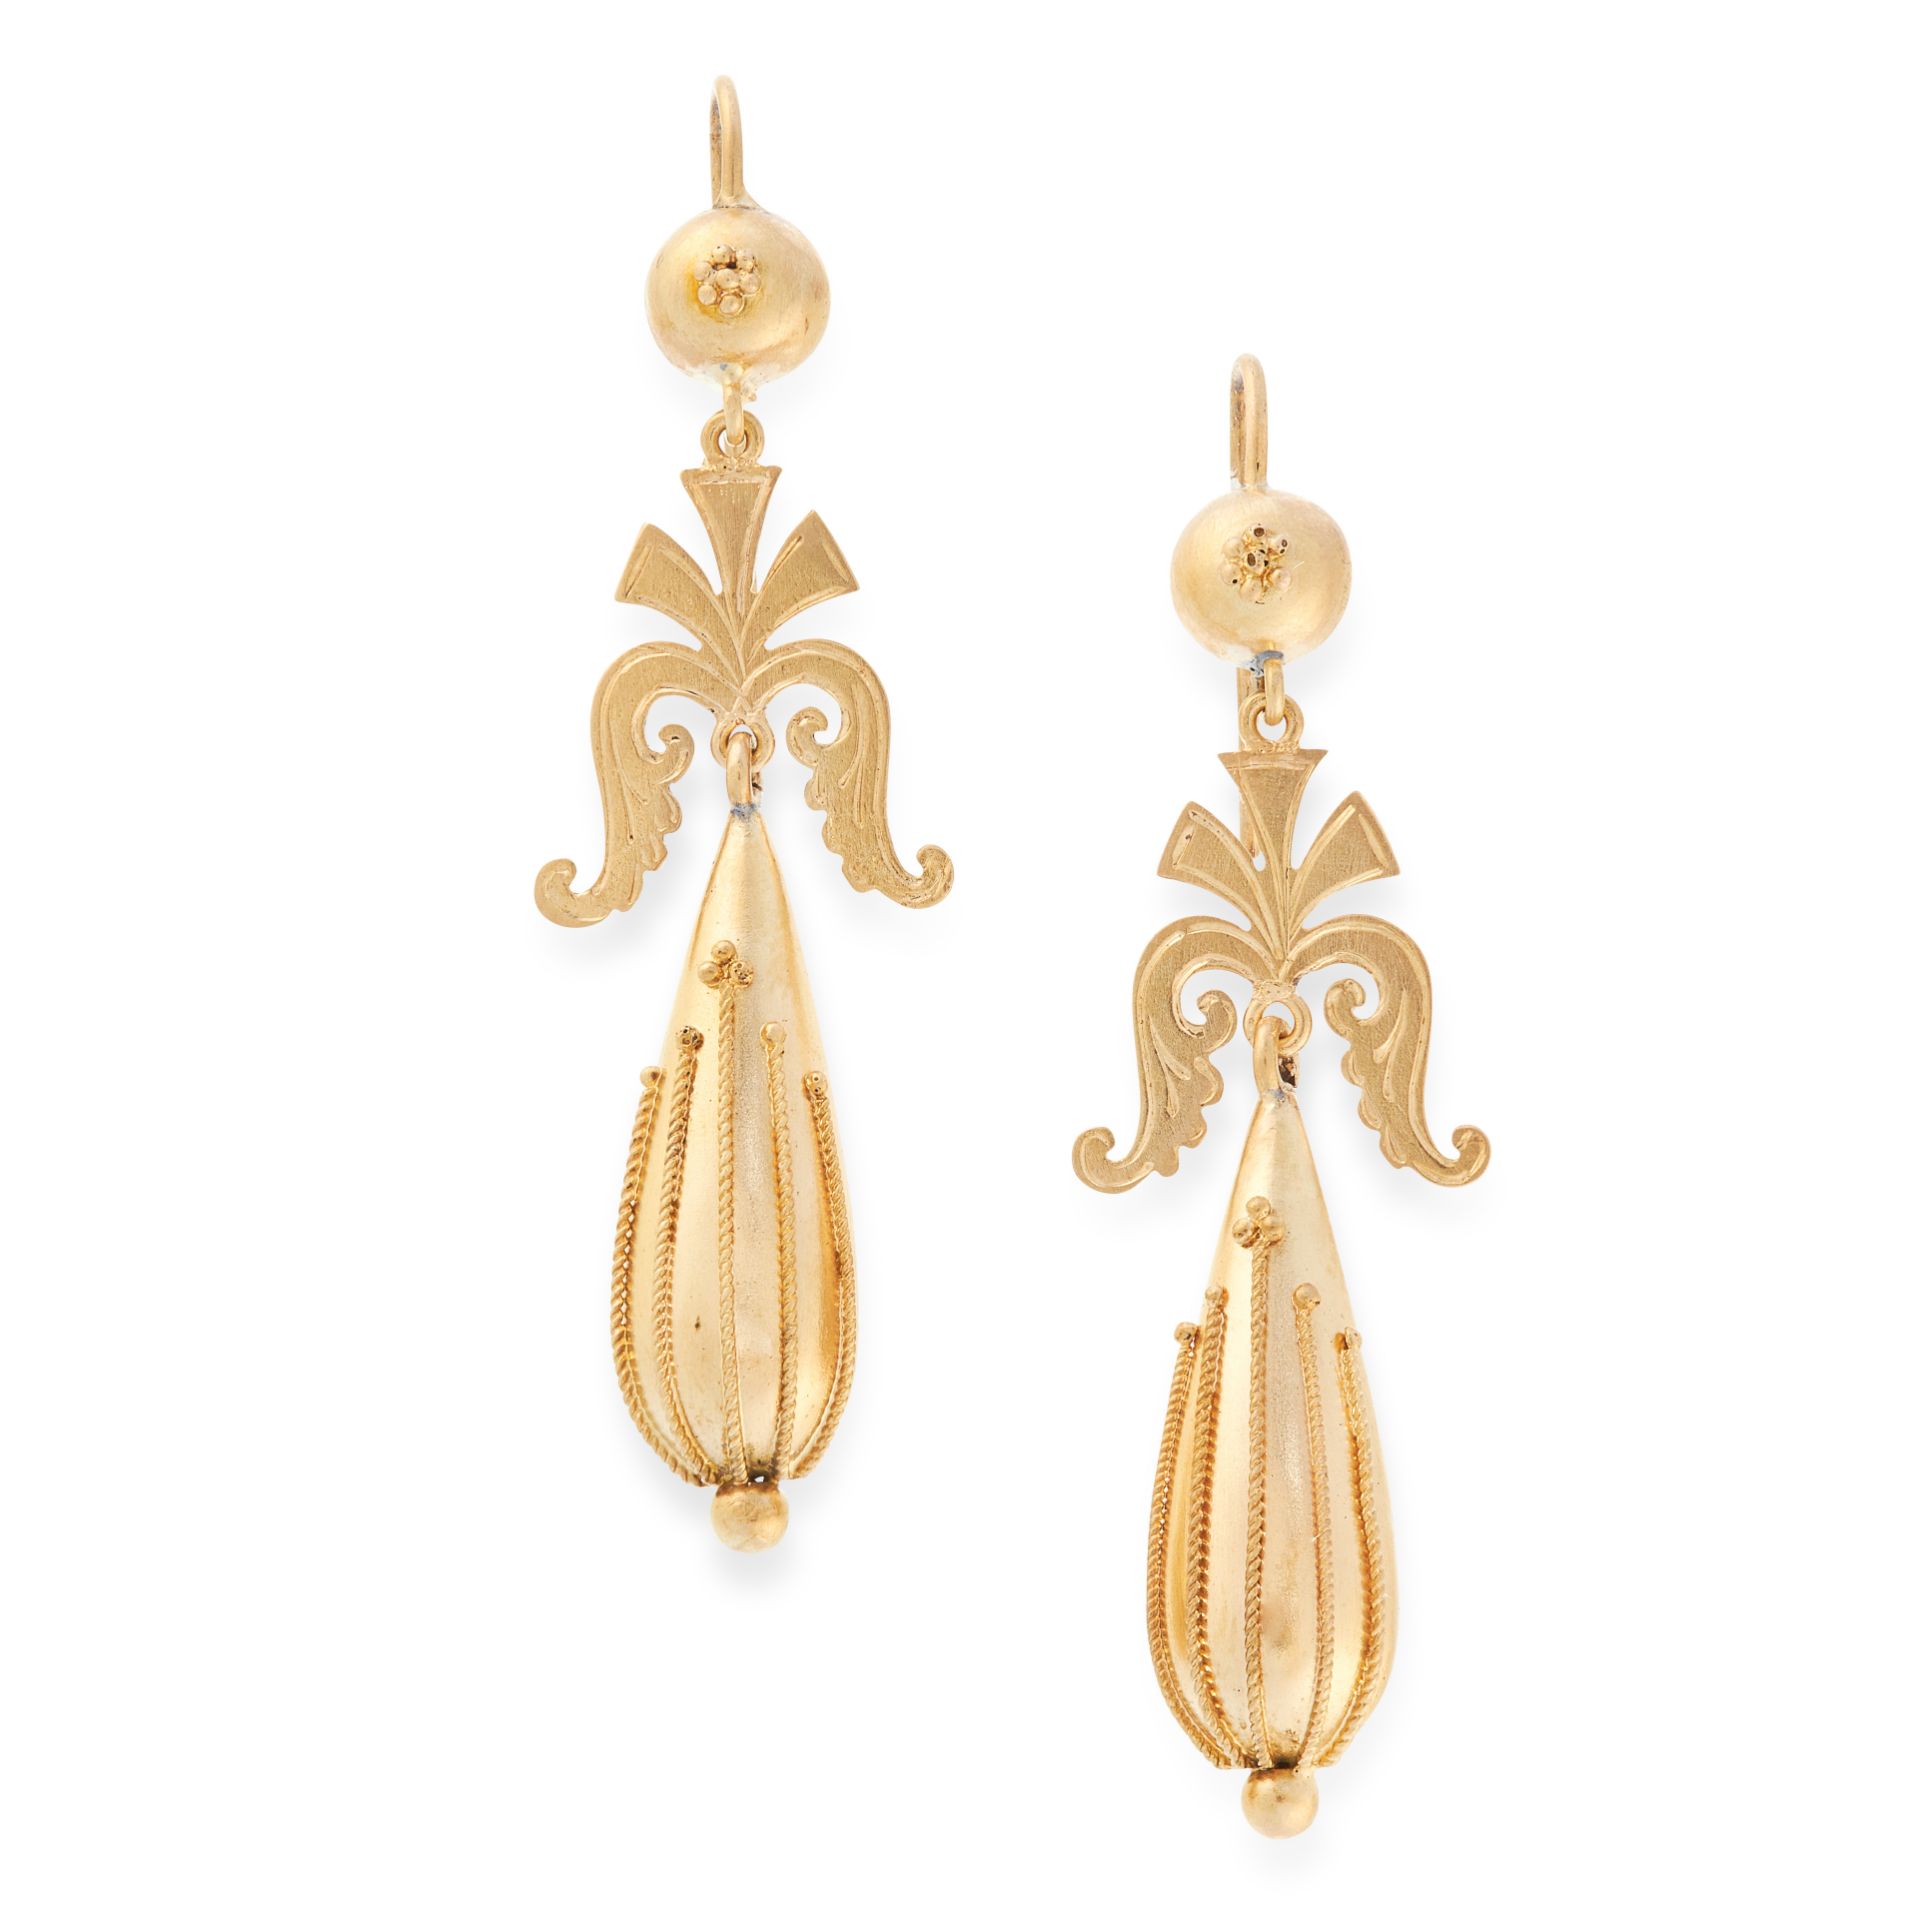 A PAIR OF ANTIQUE DROP EARRINGS, 19TH CENTURY in yellow gold, the articulated body of each formed of